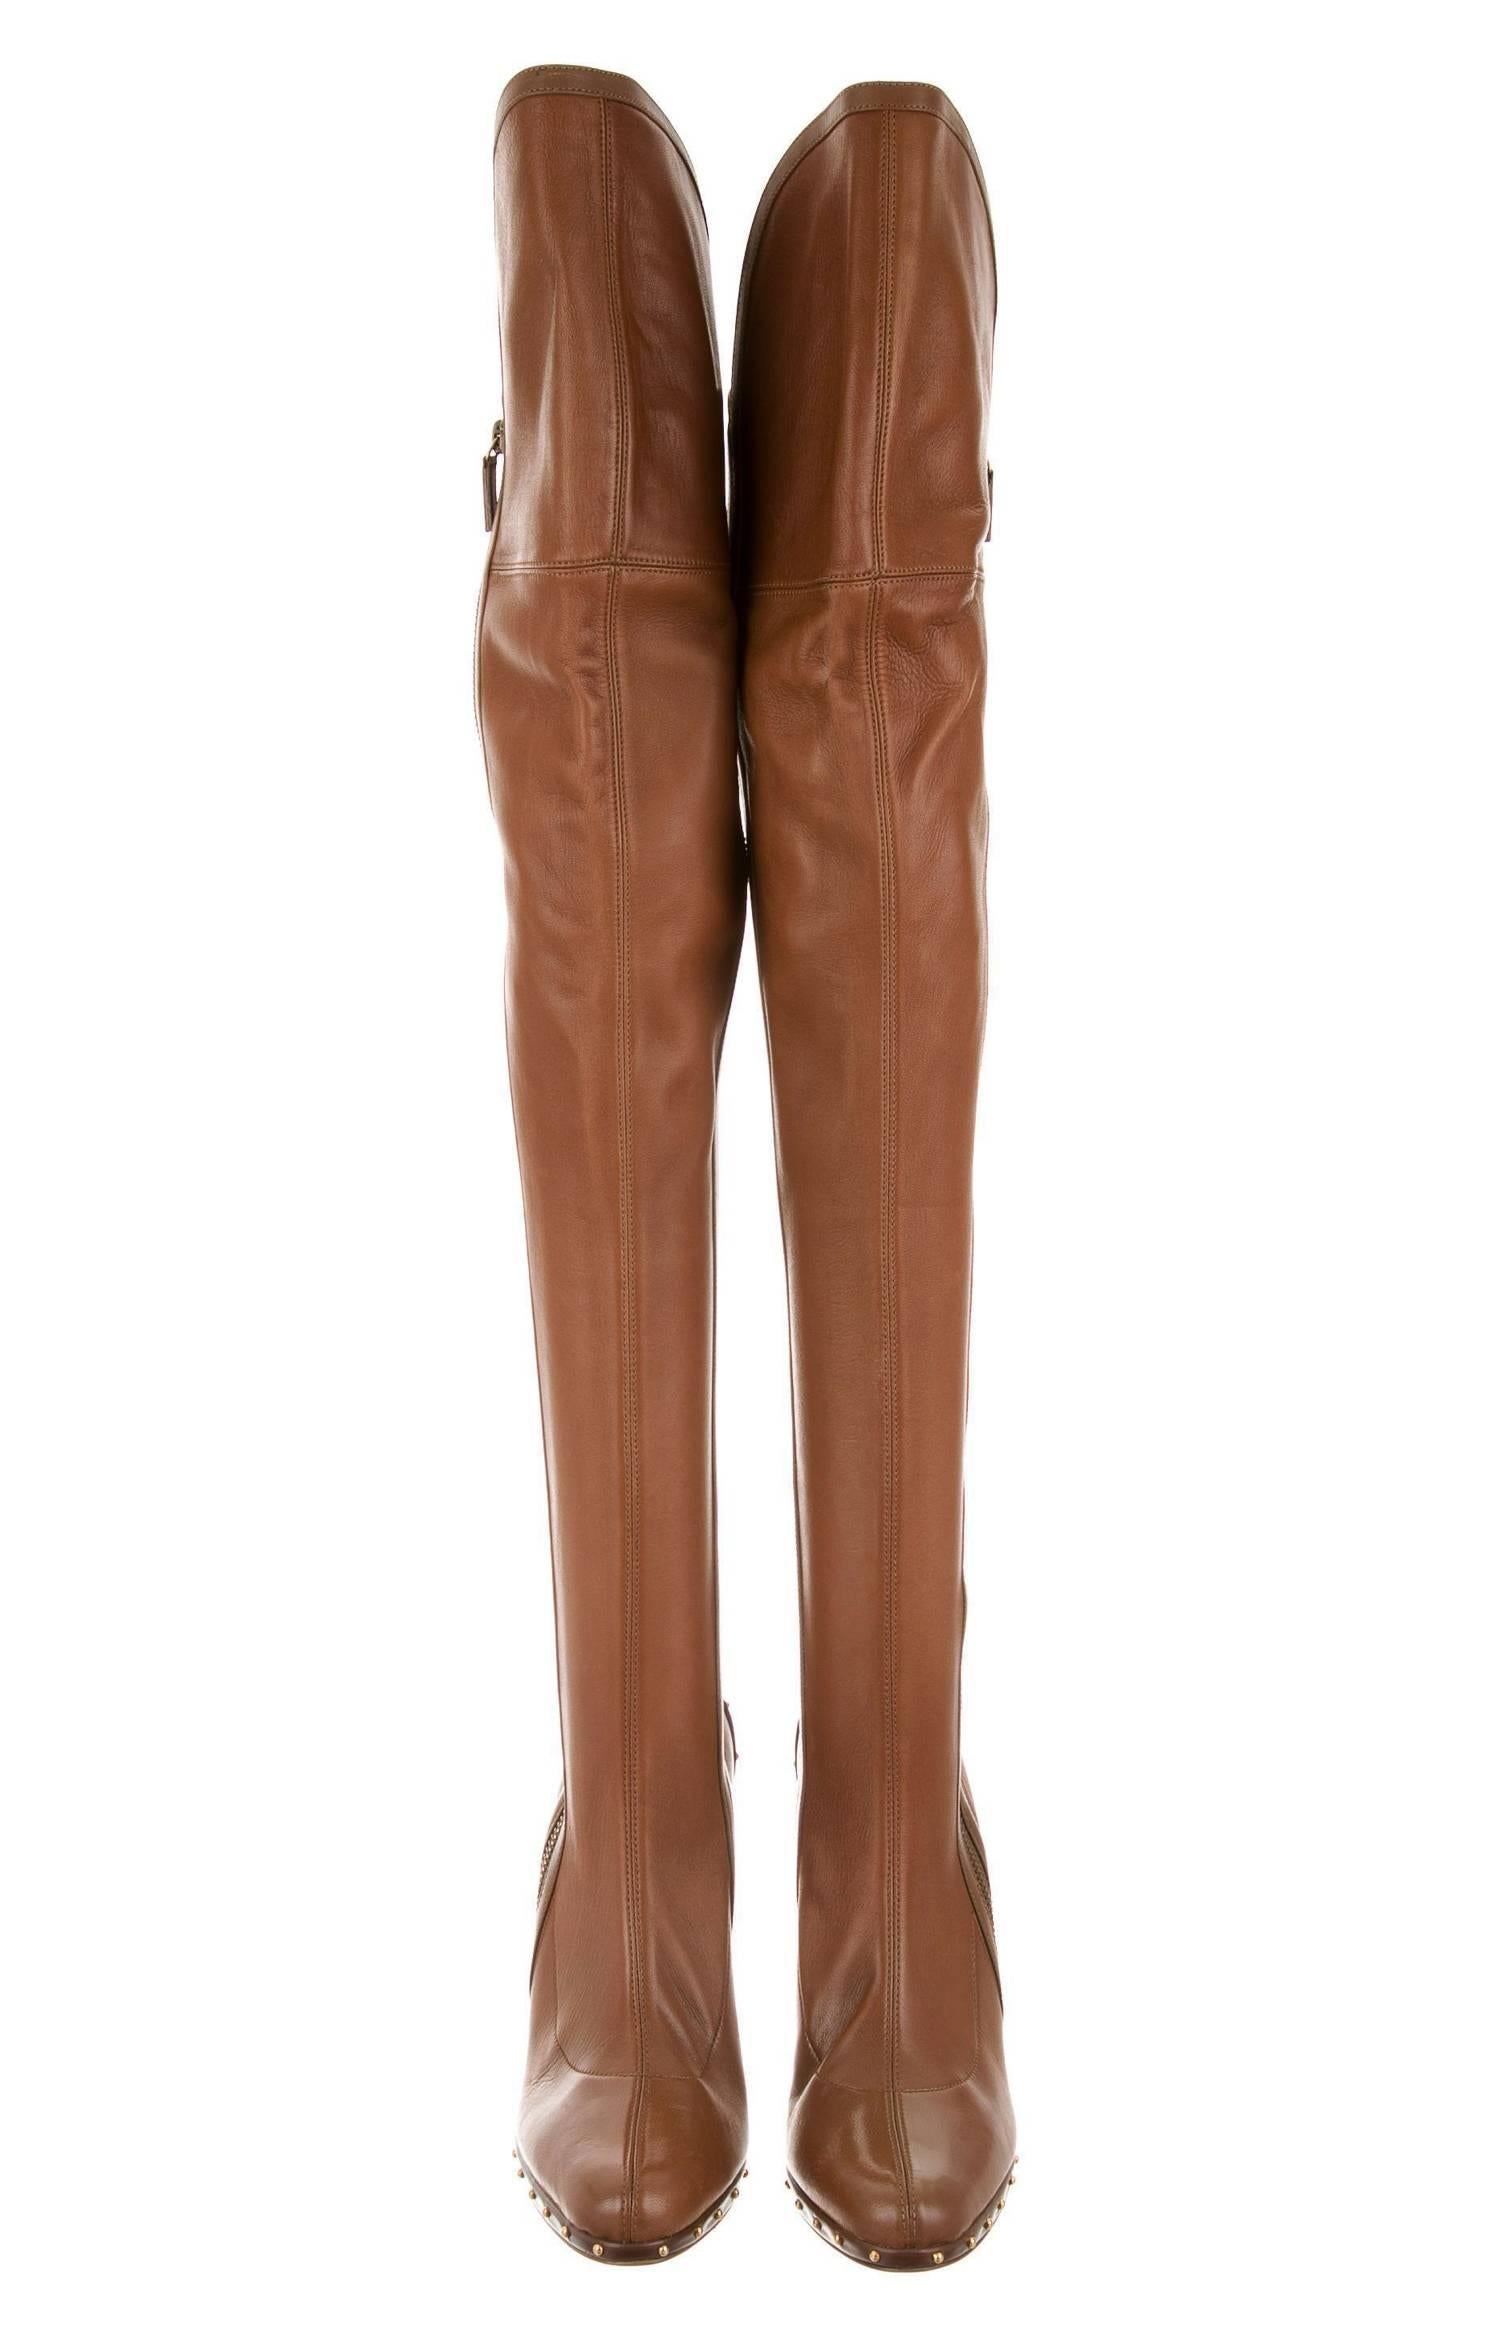 New Tom Ford for Gucci Campaign Sexy Leather Boots
Designer size 8.5 B
F/W 2003 Collection
Brown Soft Nappa Gloveskin Leather Over the Knee Boots
Decorated with Gold-tone Metal Studs 
Full Zipper Side Closure
Made in Italy
New without box.
